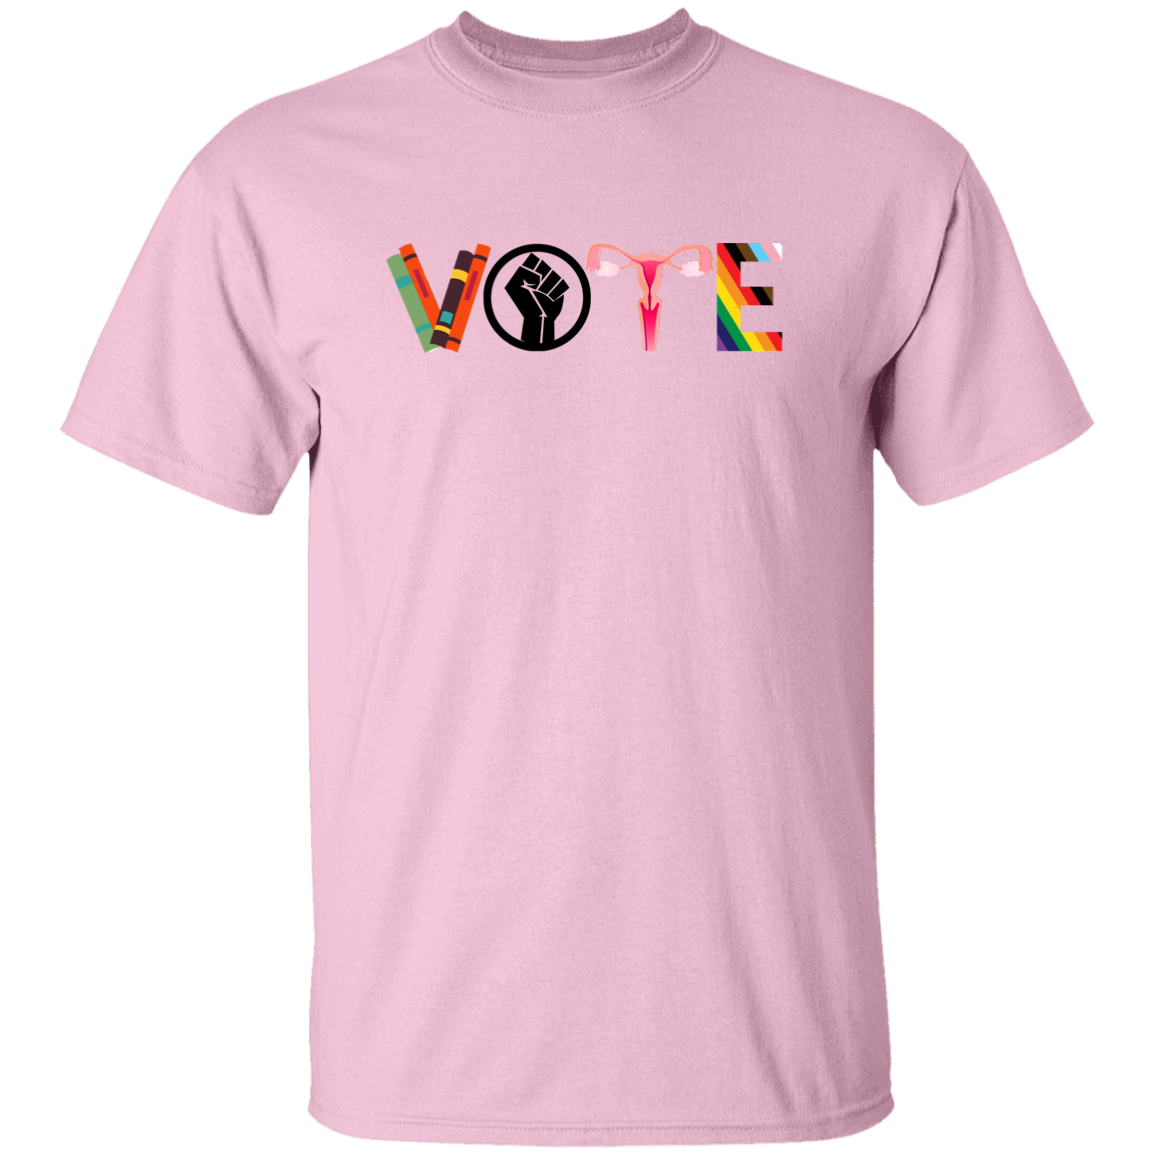 Bedre Bounce dybde VOTE T-Shirt | Banned Books Tee, Reproductive Rights Tee, BLM T-Shirt, -  Women Speak Store